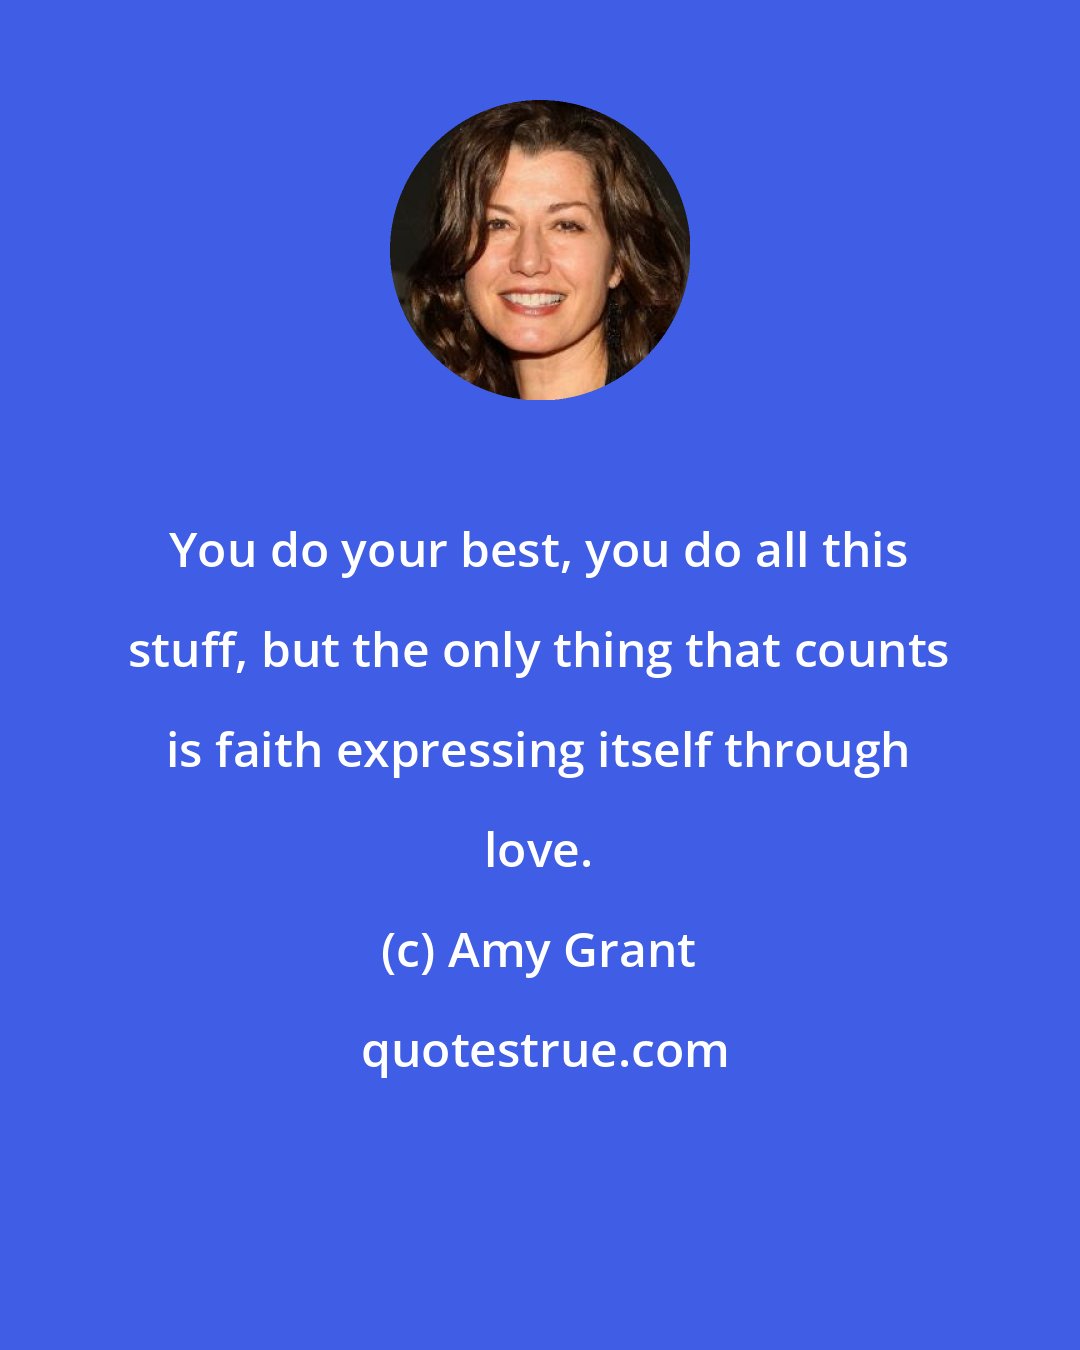 Amy Grant: You do your best, you do all this stuff, but the only thing that counts is faith expressing itself through love.